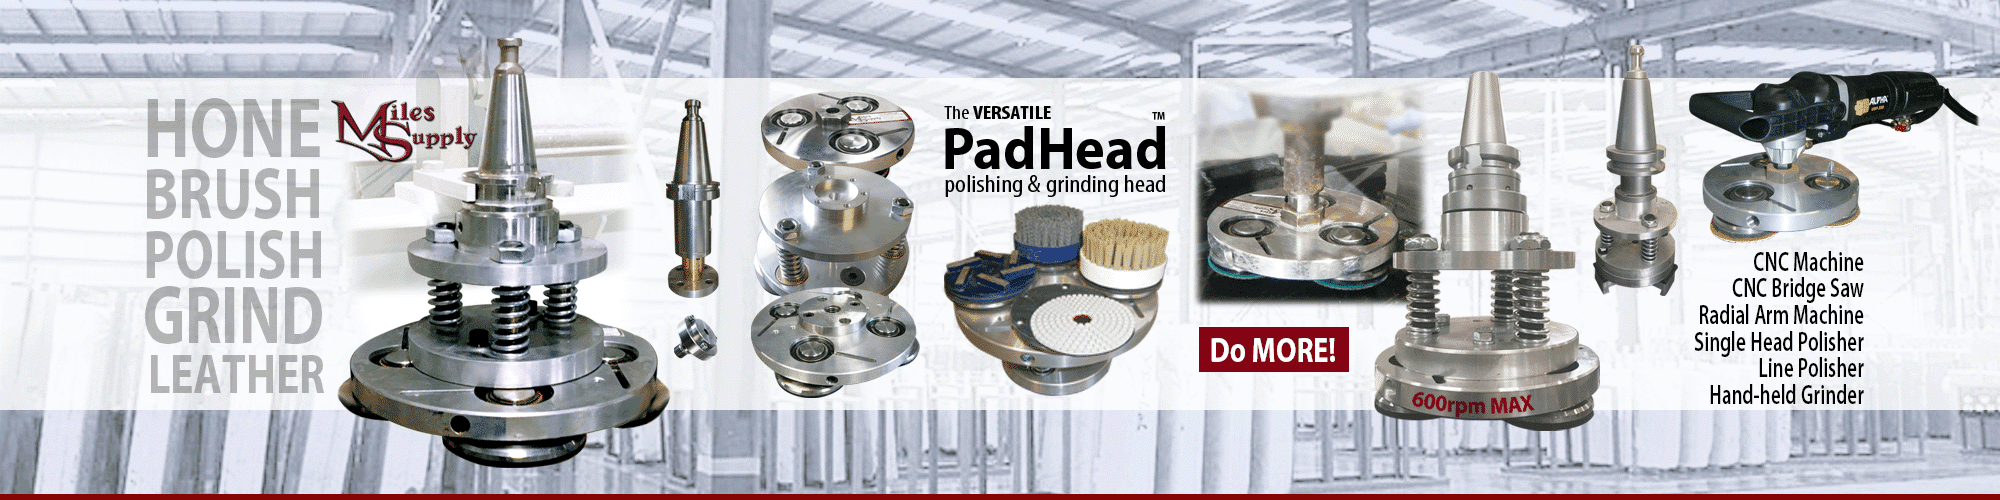 Versatile Padheads work on grinders, CNC machines, line polishers and More! They polish, hone, antique finish, grind stone.